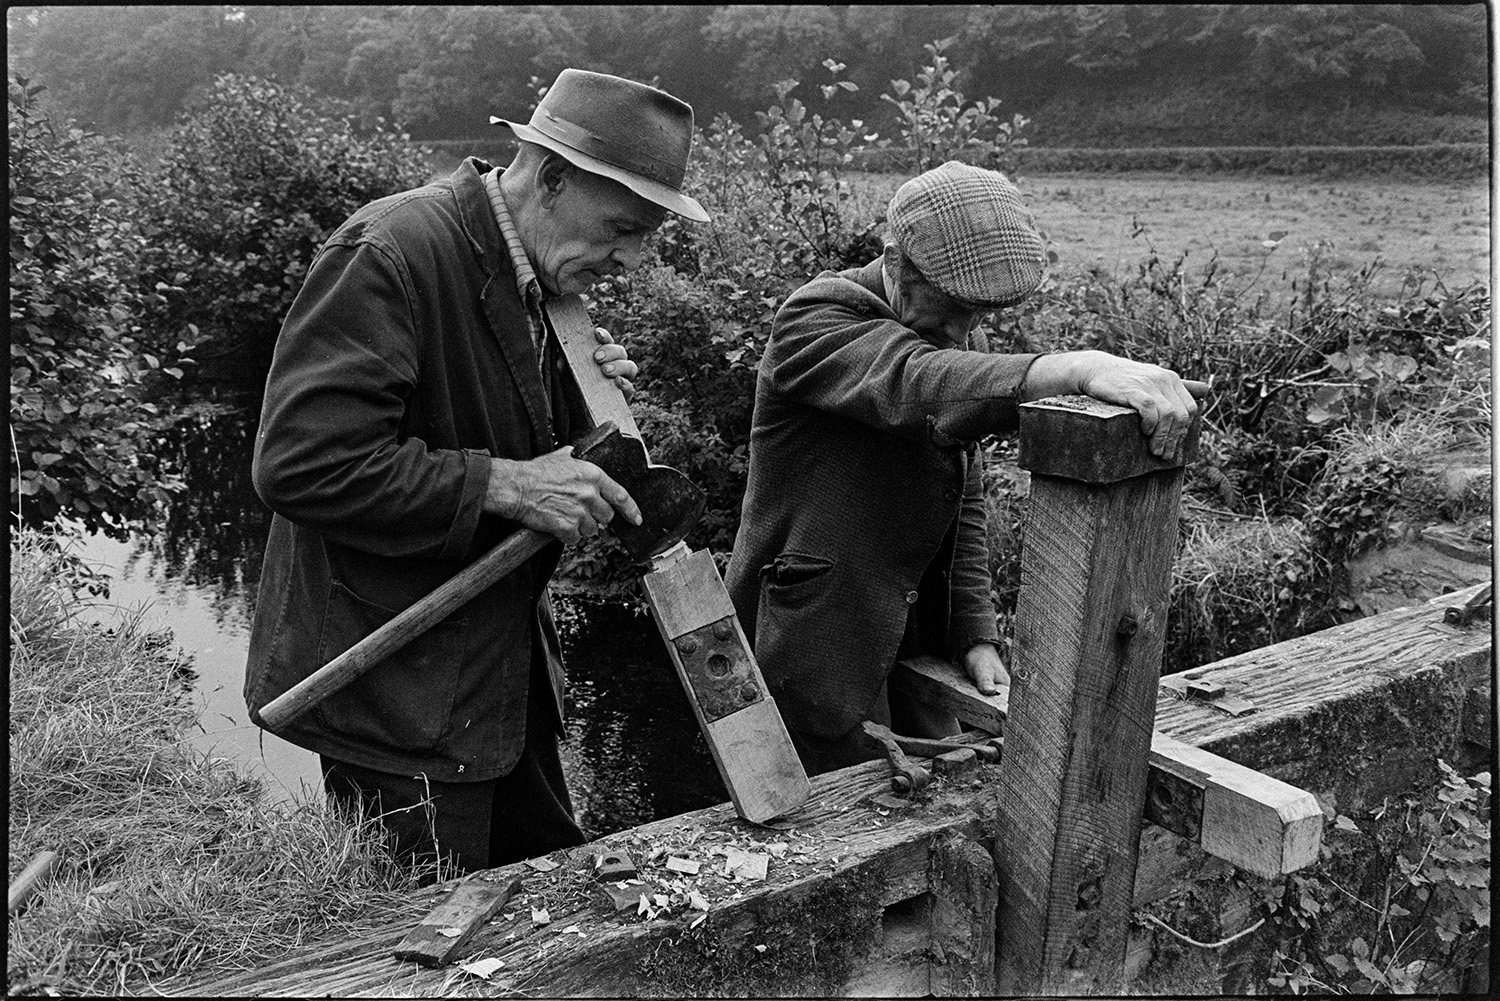 Men repairing wooden sluice gate. 
[Two men repairing wooden sluice gates near Head Mill, Kings Nympton. One of the men is using an axe to shave one of the wooden parts of the sluice gate.]